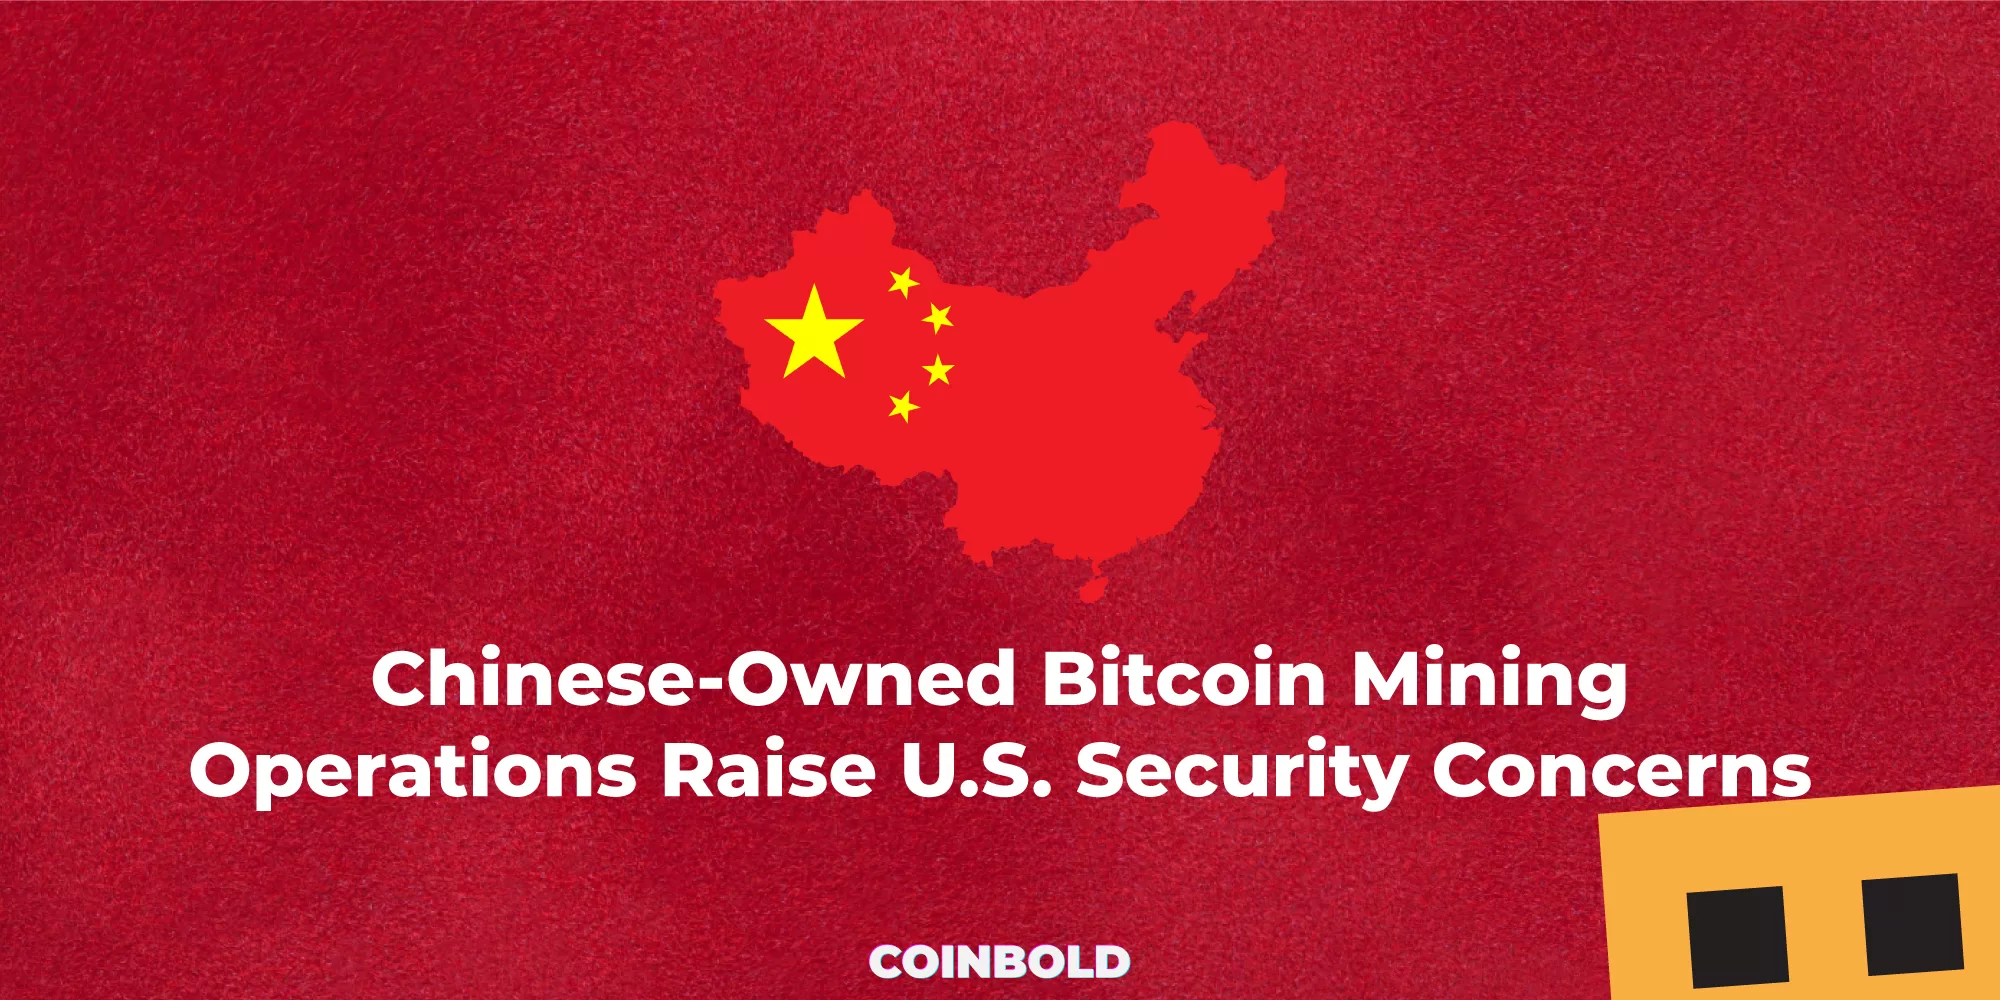 Chinese Owned Bitcoin Mining Operations Raise U.S. Security Concerns